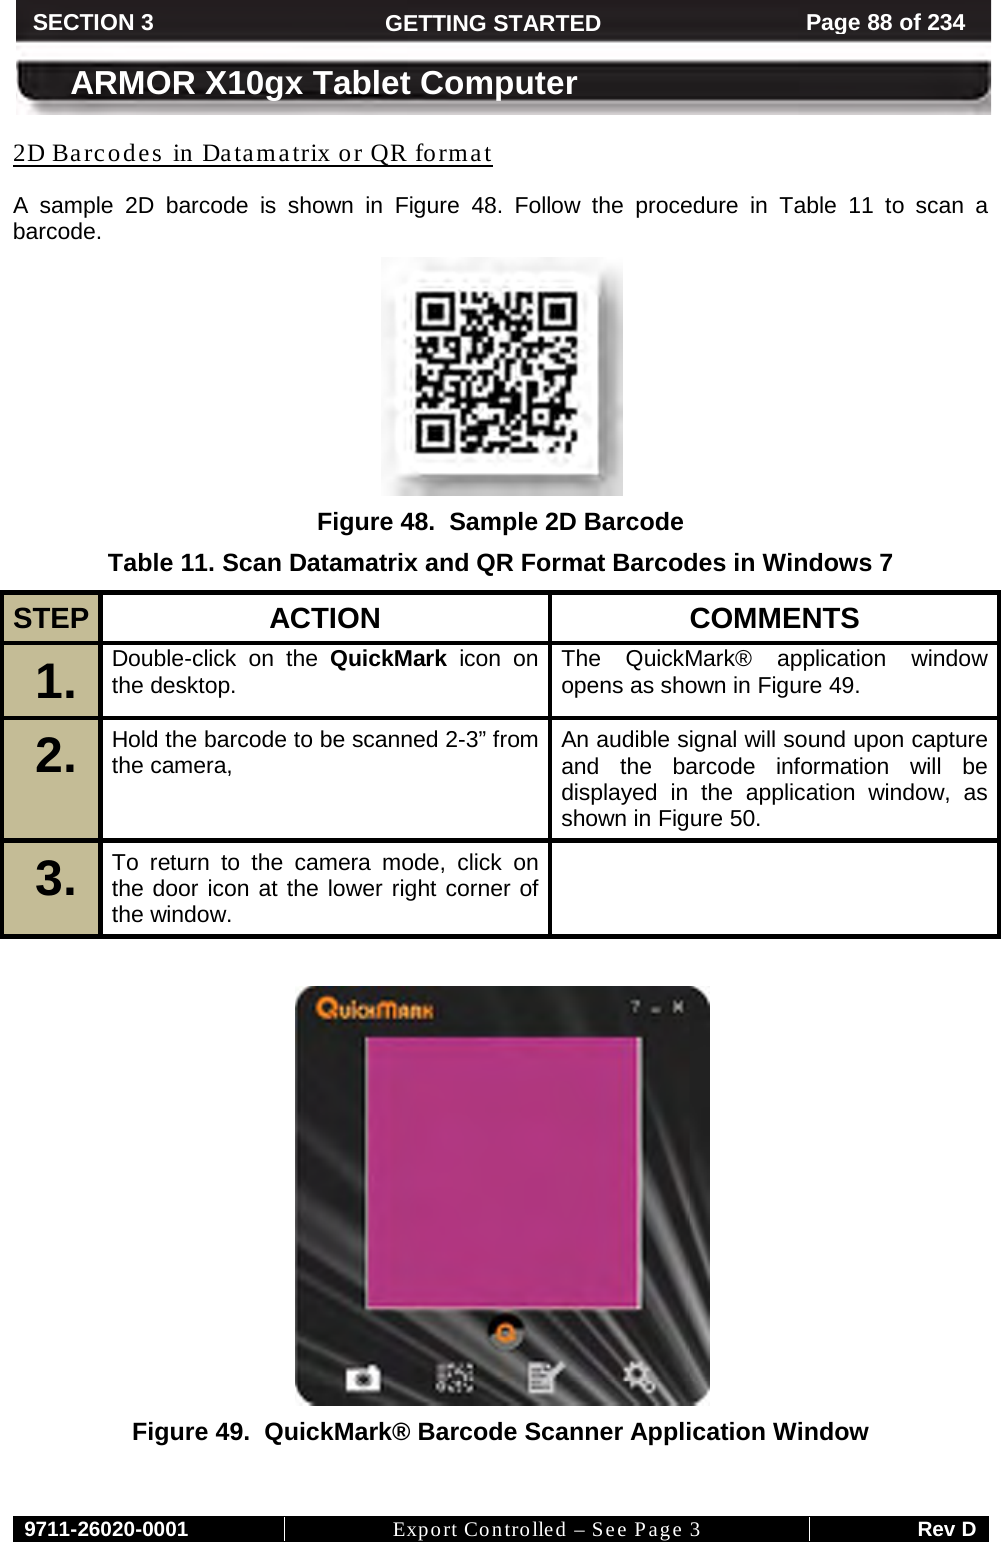     9711-26020-0001 Export Controlled – See Page 3 Rev D SECTION 3 GETTING STARTED Page 88 of 234  ARMOR X10gx Tablet Computer A sample 2D barcode is shown in 2D Barcodes in Datamatrix or QR format Figure  48. Follow the procedure in Table  11 to scan a barcode.  Figure 48.  Sample 2D Barcode Table 11. Scan Datamatrix and QR Format Barcodes in Windows 7 STEP  ACTION COMMENTS 1.  Double-click on the QuickMark icon on the desktop. The QuickMark® application window opens as shown in Figure 49. 2.  Hold the barcode to be scanned 2-3” from the camera,  An audible signal will sound upon capture and the barcode information will be displayed in the application window, as shown in Figure 50. 3.  To return to the camera mode, click on the door icon at the lower right corner of the window.     Figure 49.  QuickMark® Barcode Scanner Application Window 